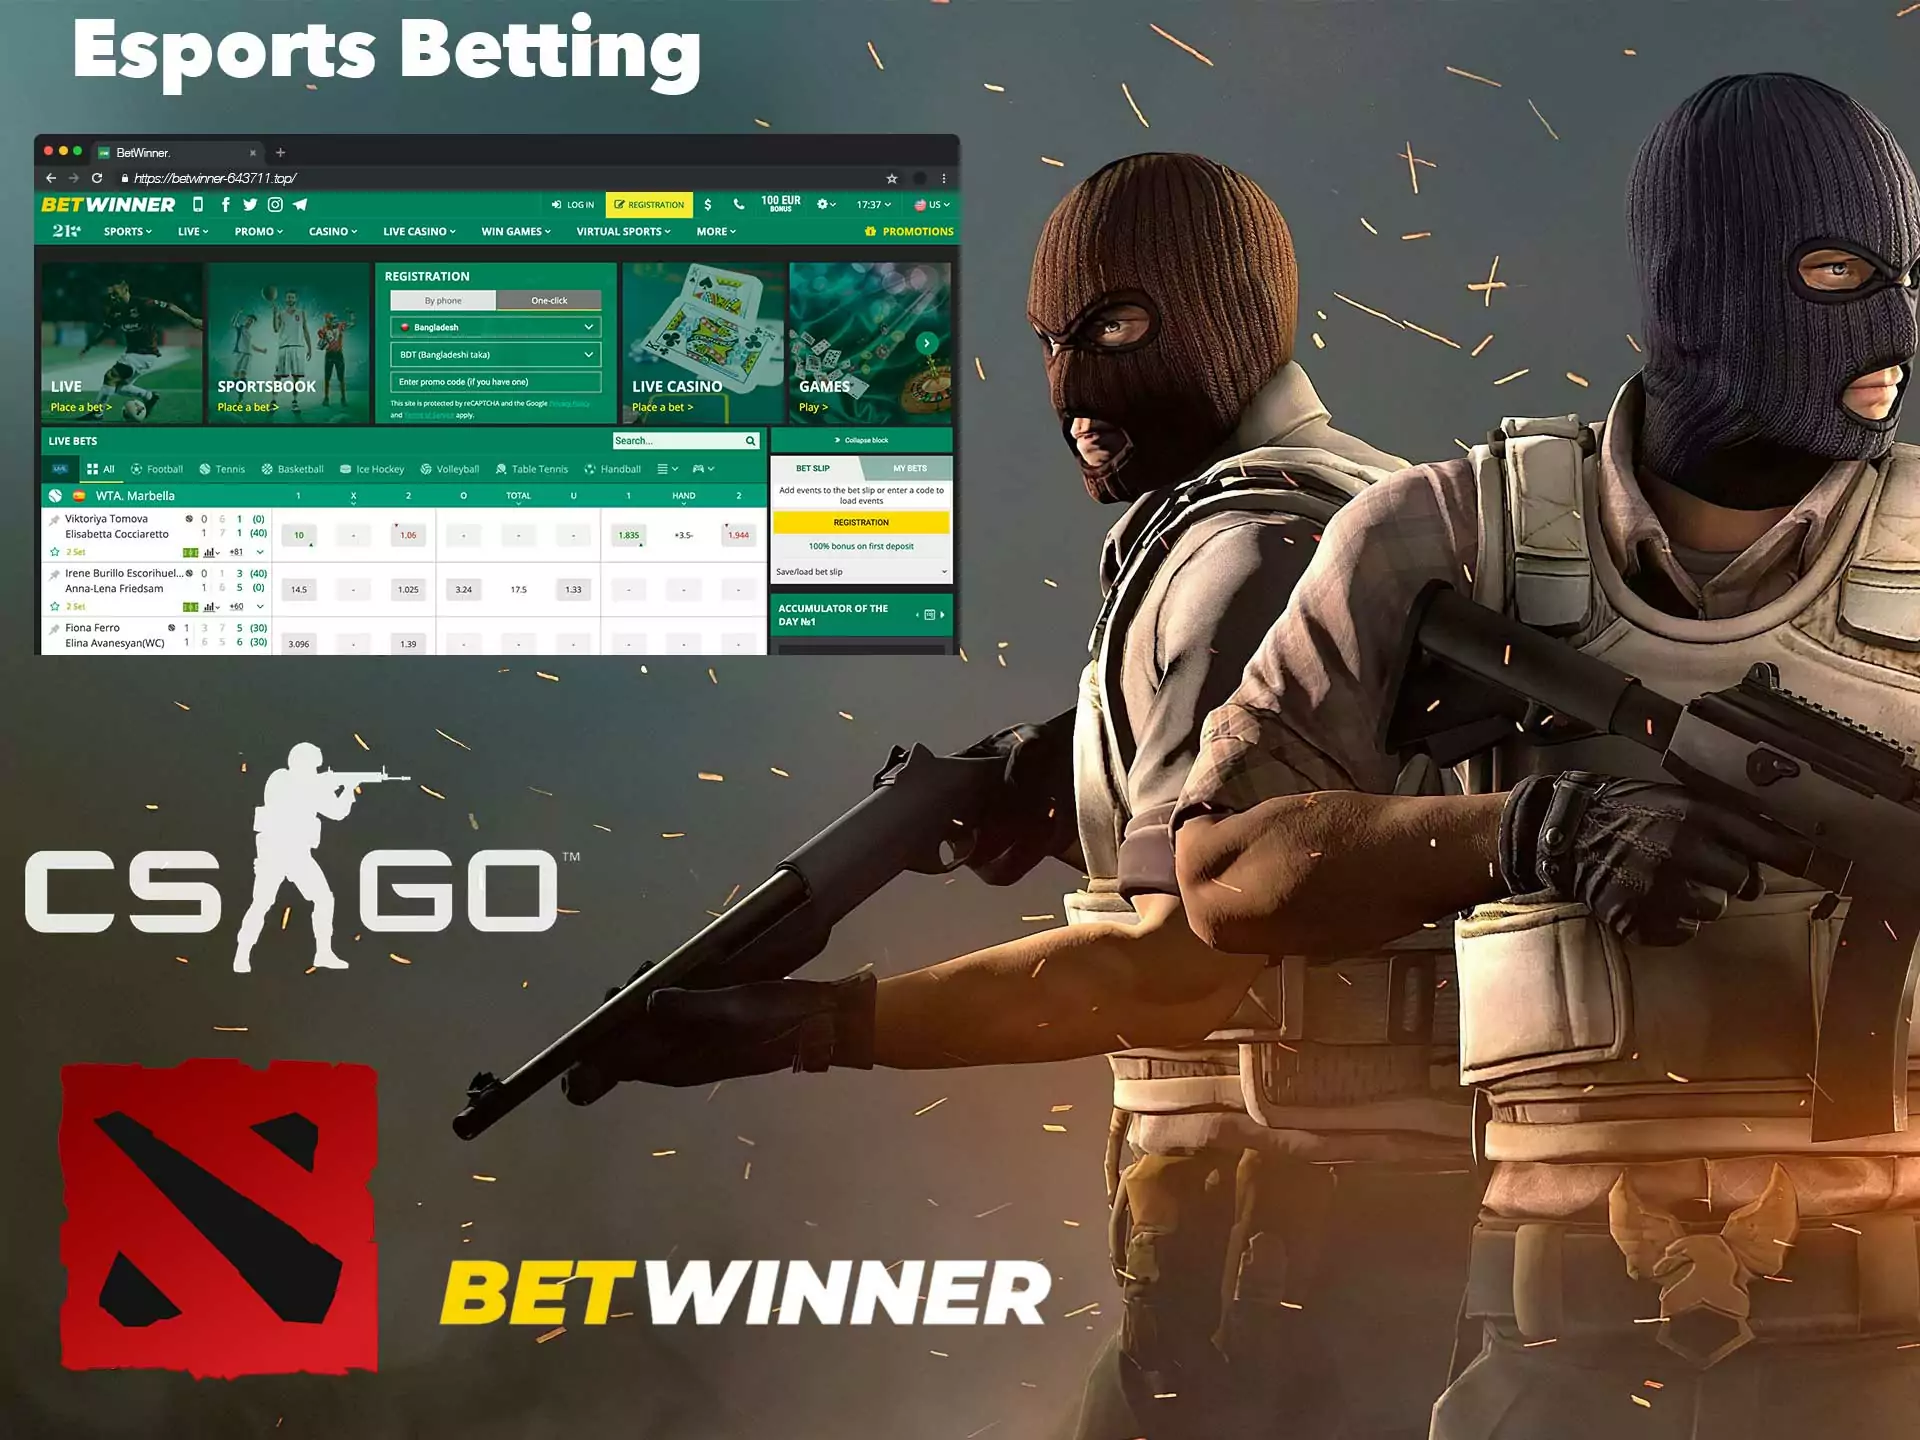 Most people in Bangladesh are fond of betting on cybersport, this section is very popular at Betwinner.